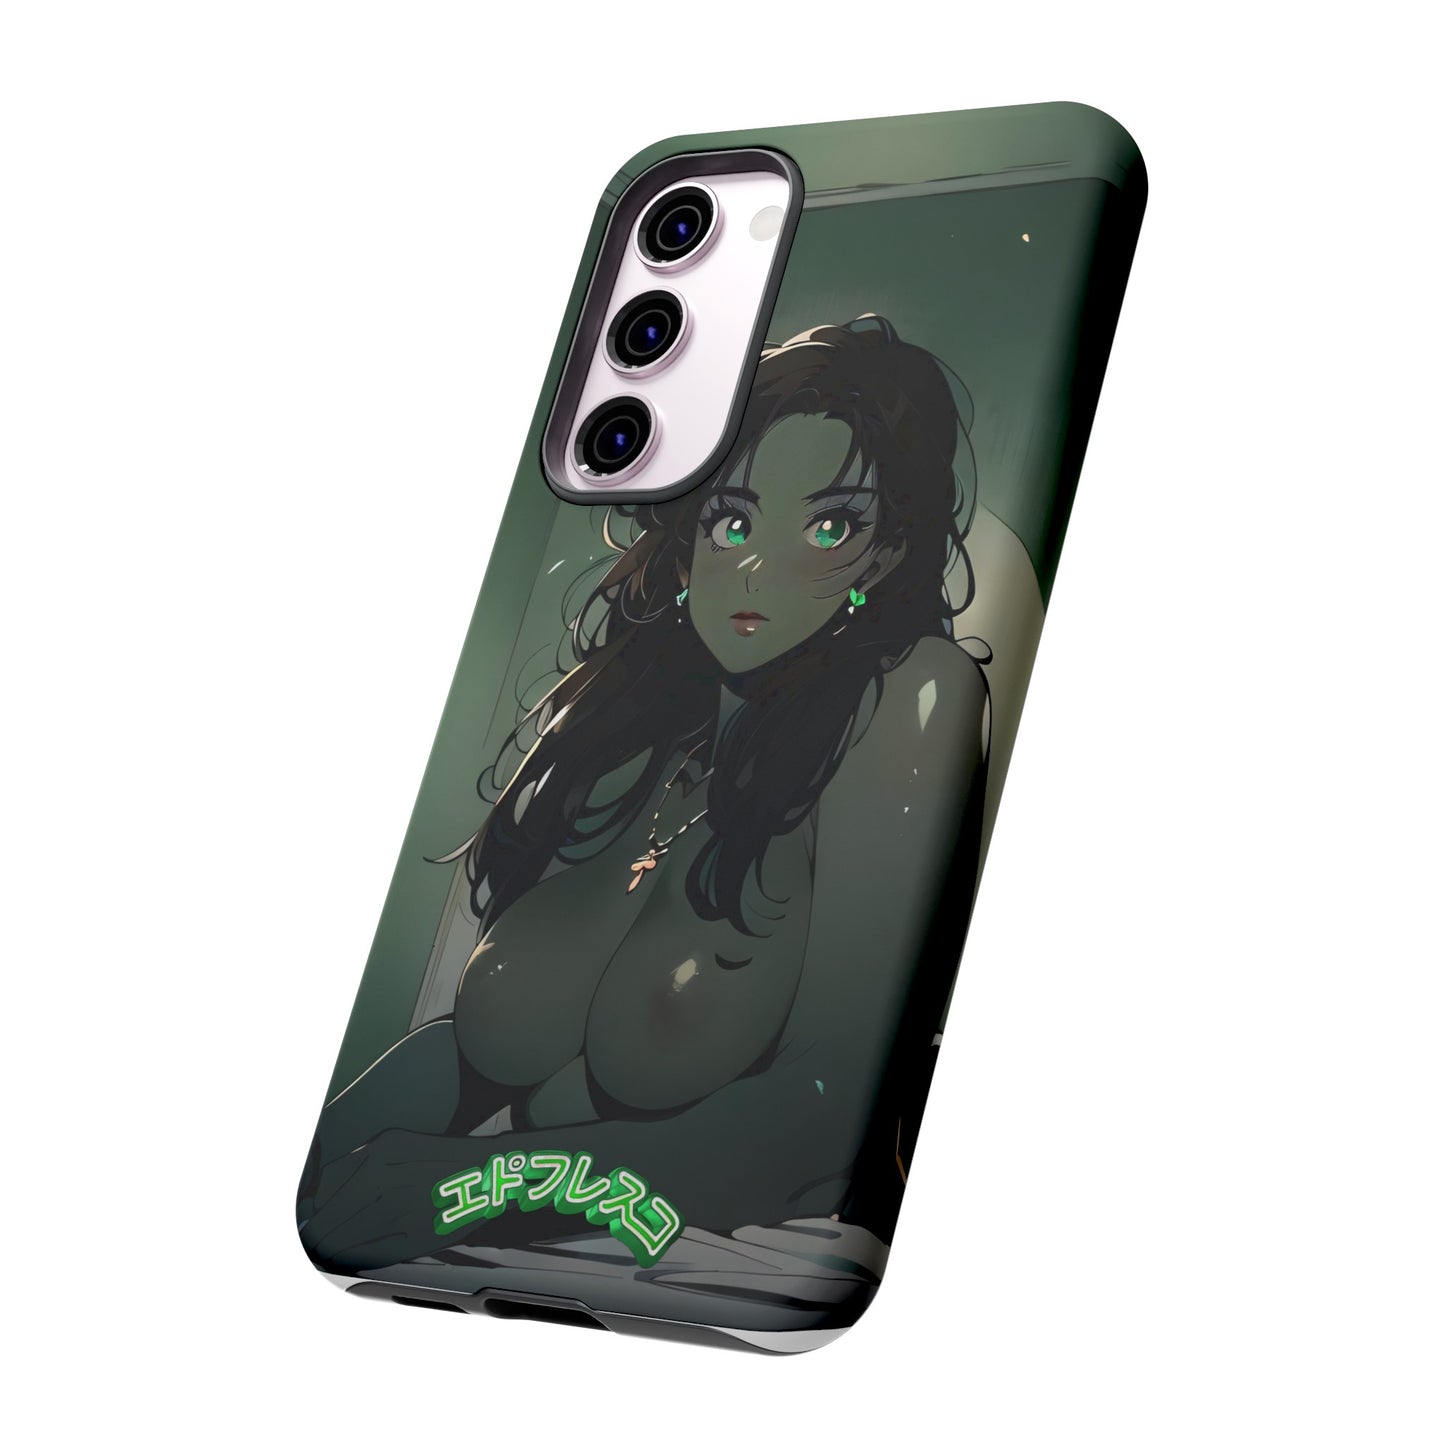 Anime Style Art Tough Cases- "What a Demon Looks Like"